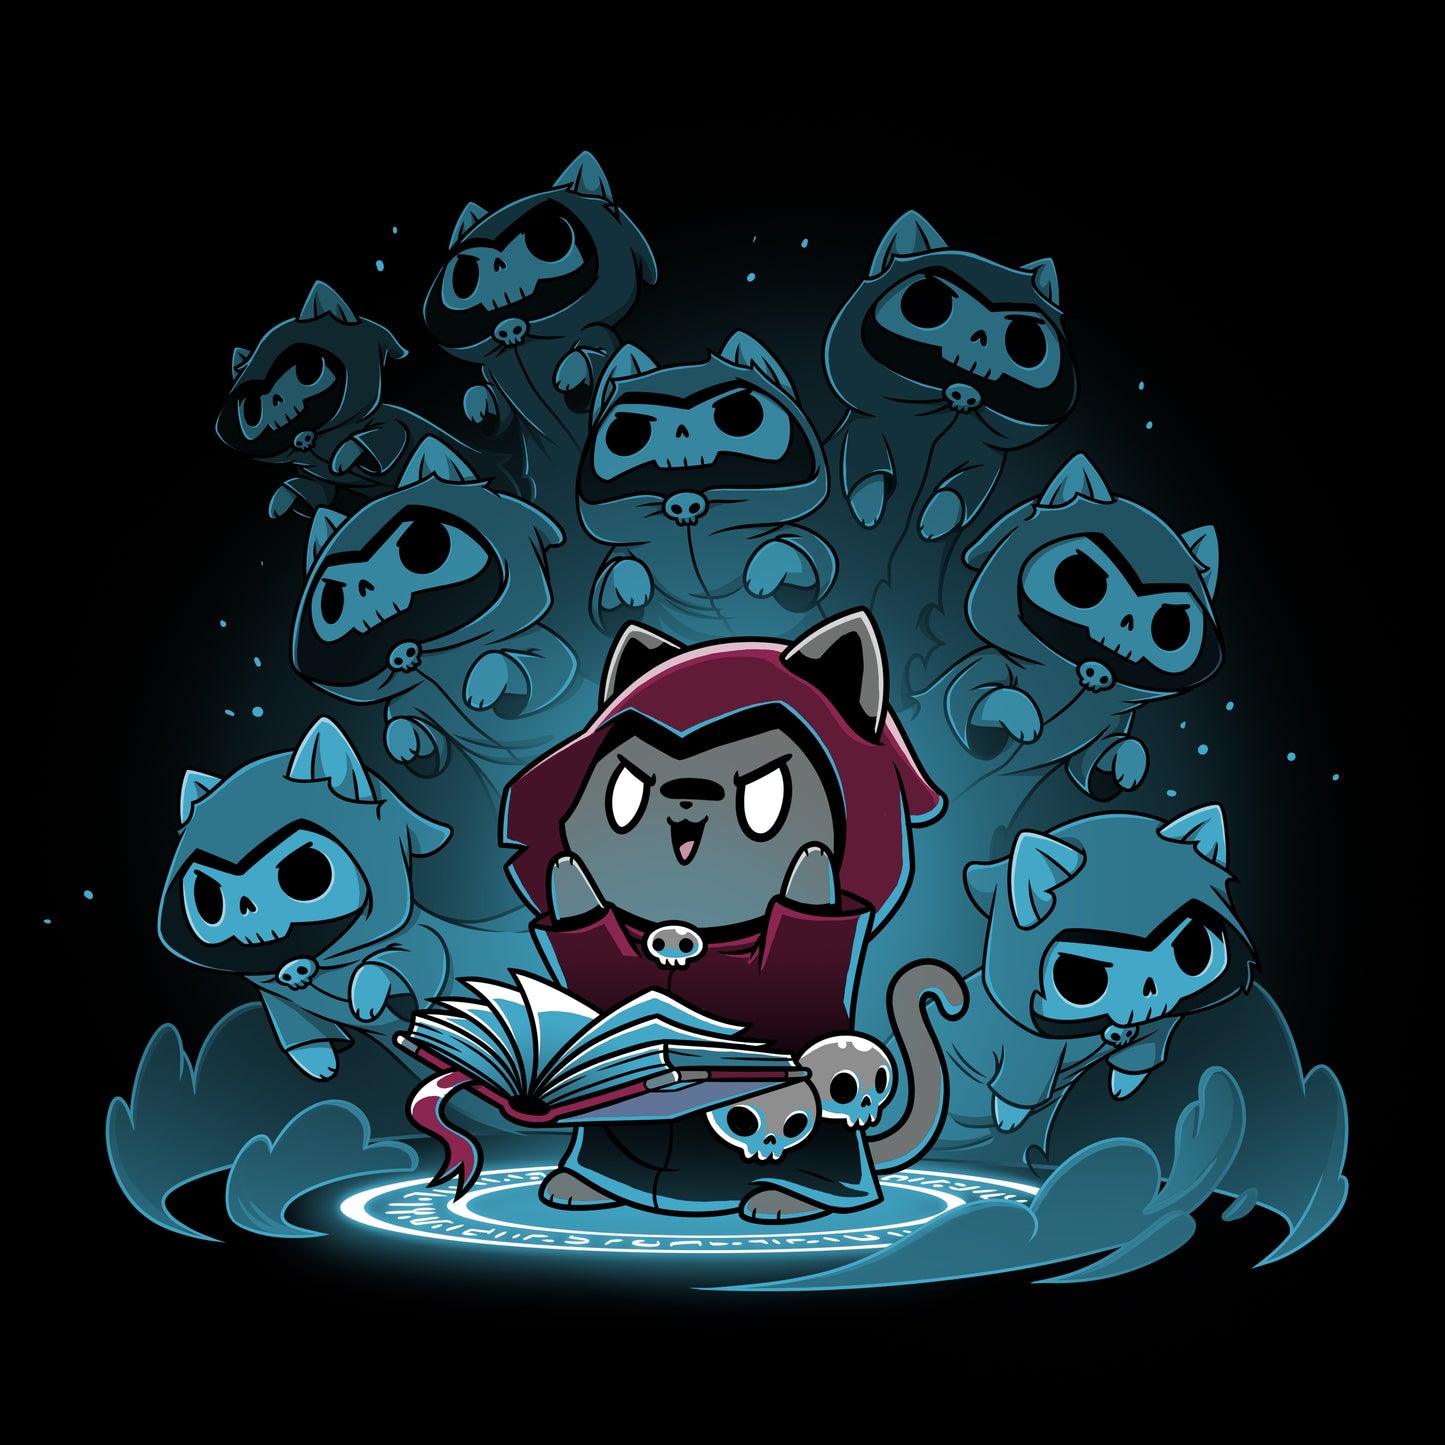 A Necromancer Kitty from TeeTurtle is holding a book in front of a group of monsters.